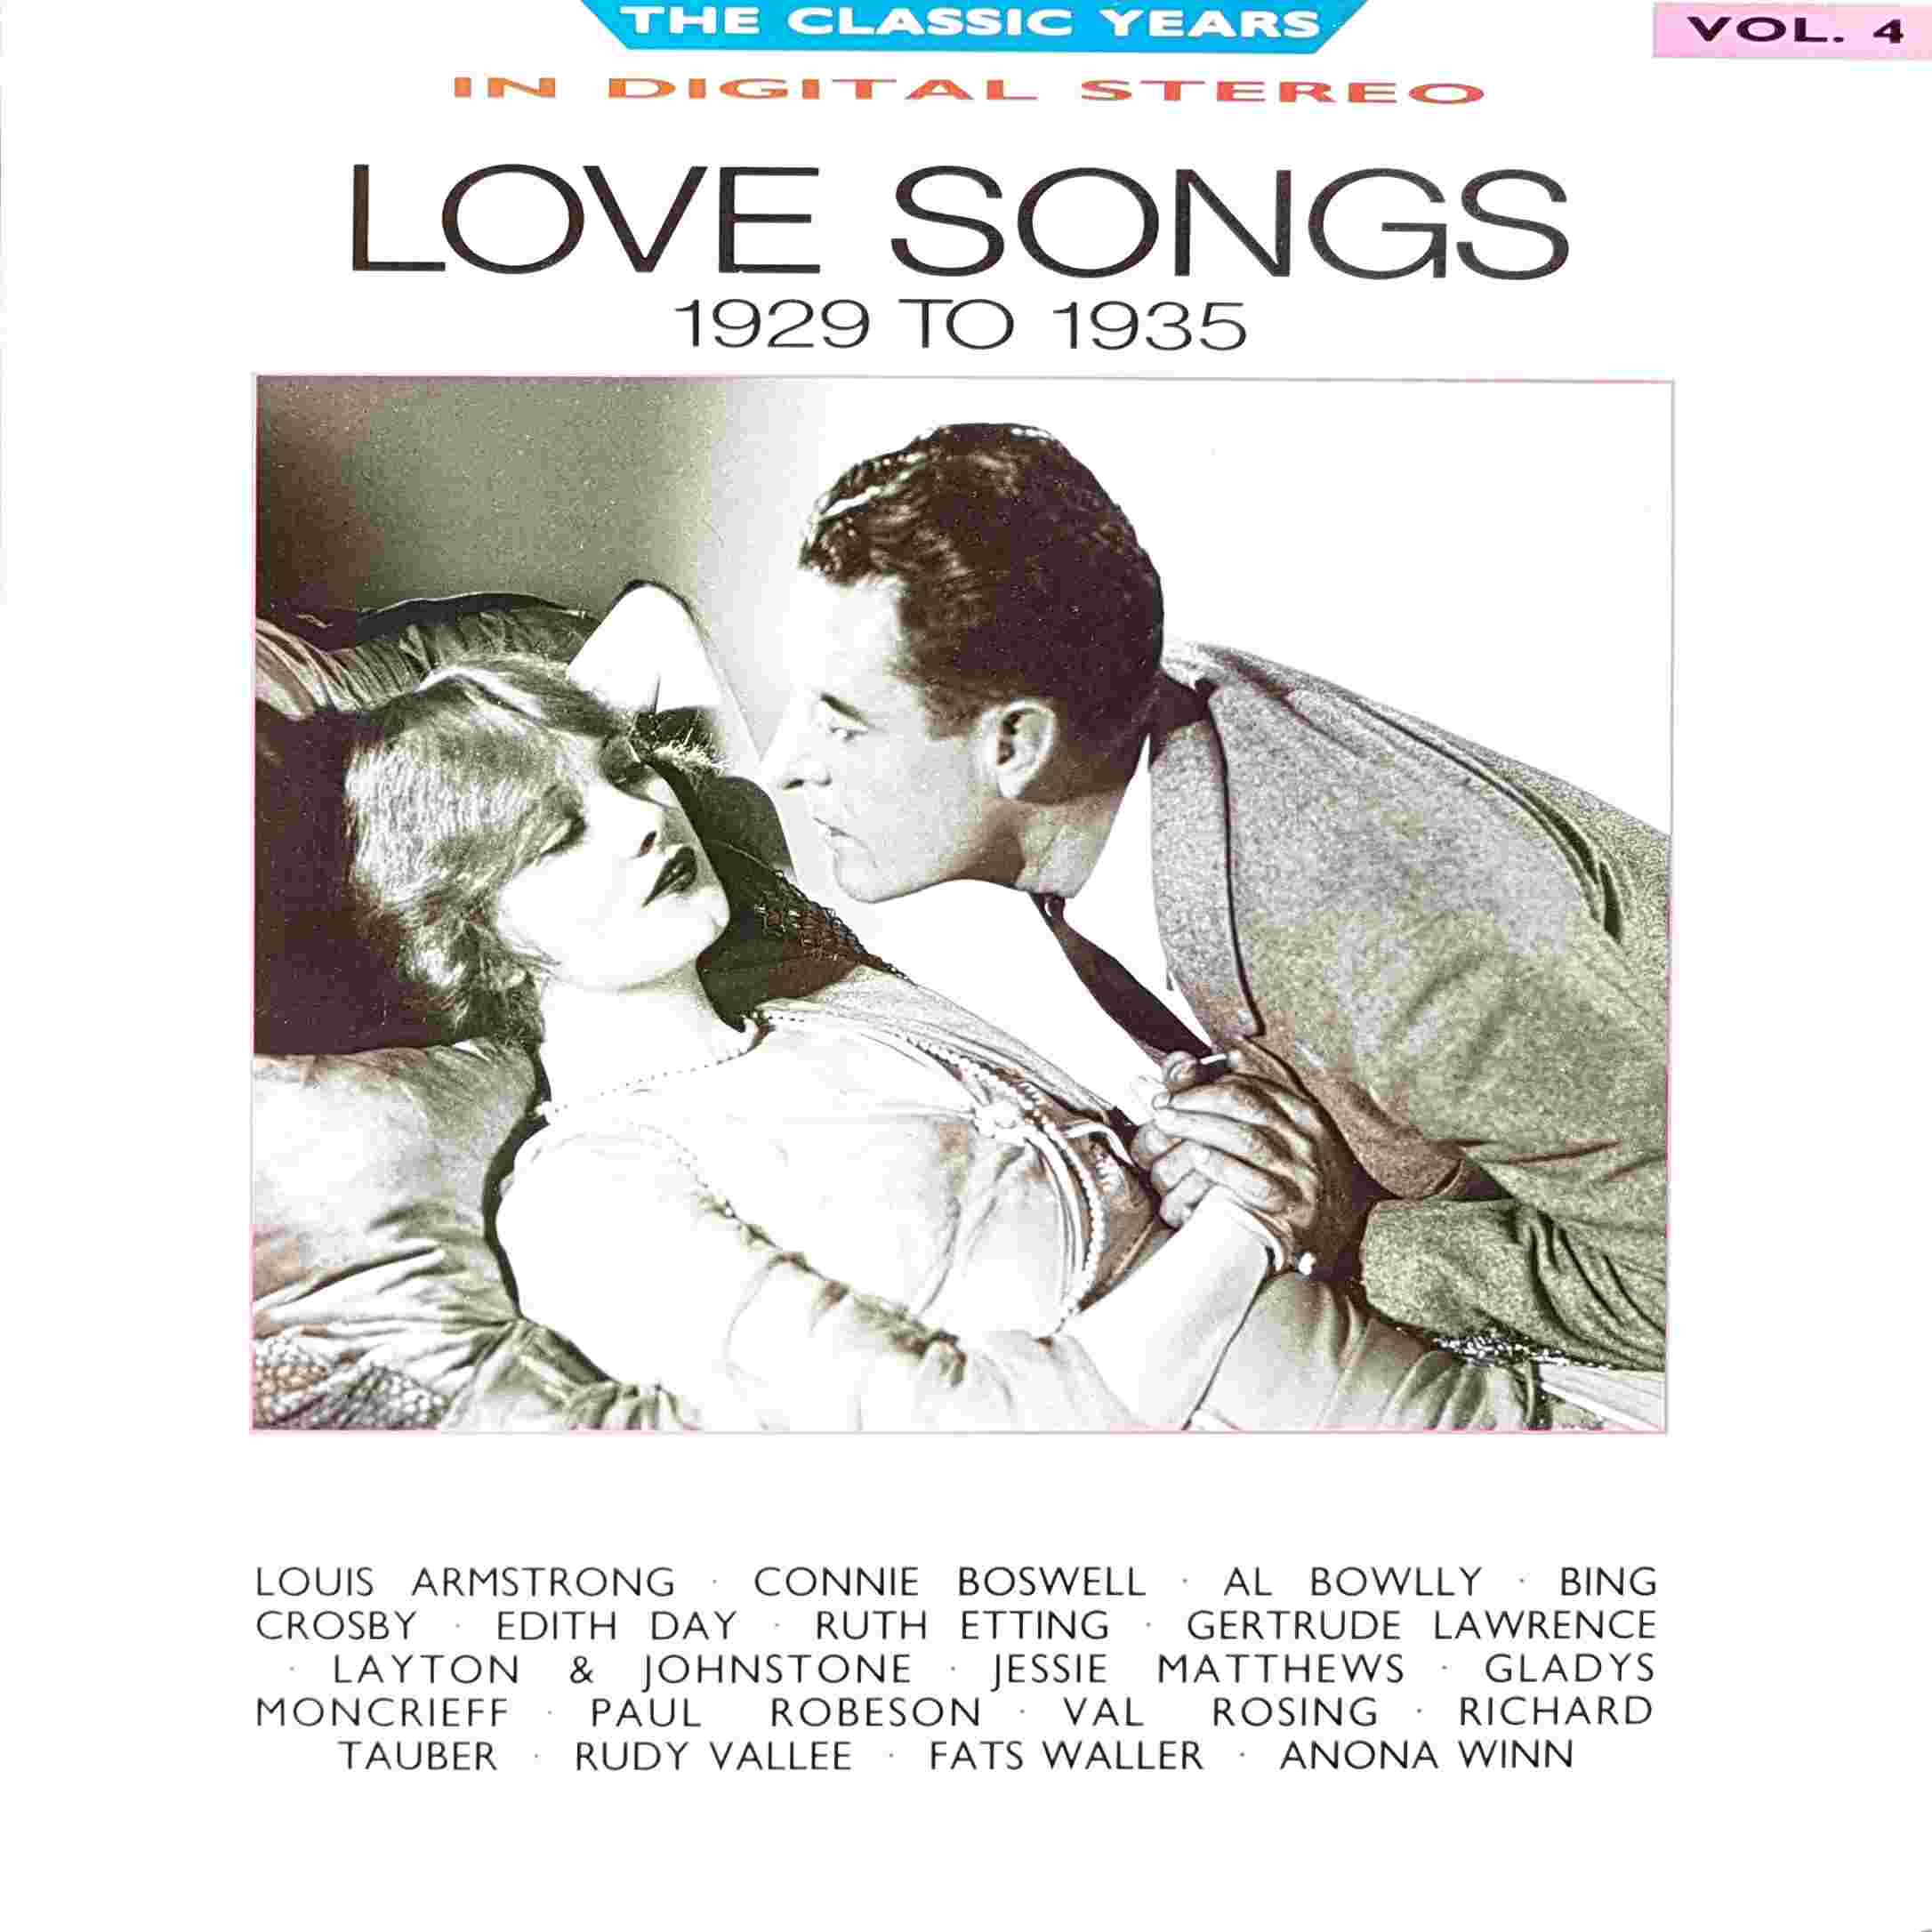 Picture of REB 651 Classic years - Volume 4, Love songs by artist Various from the BBC records and Tapes library